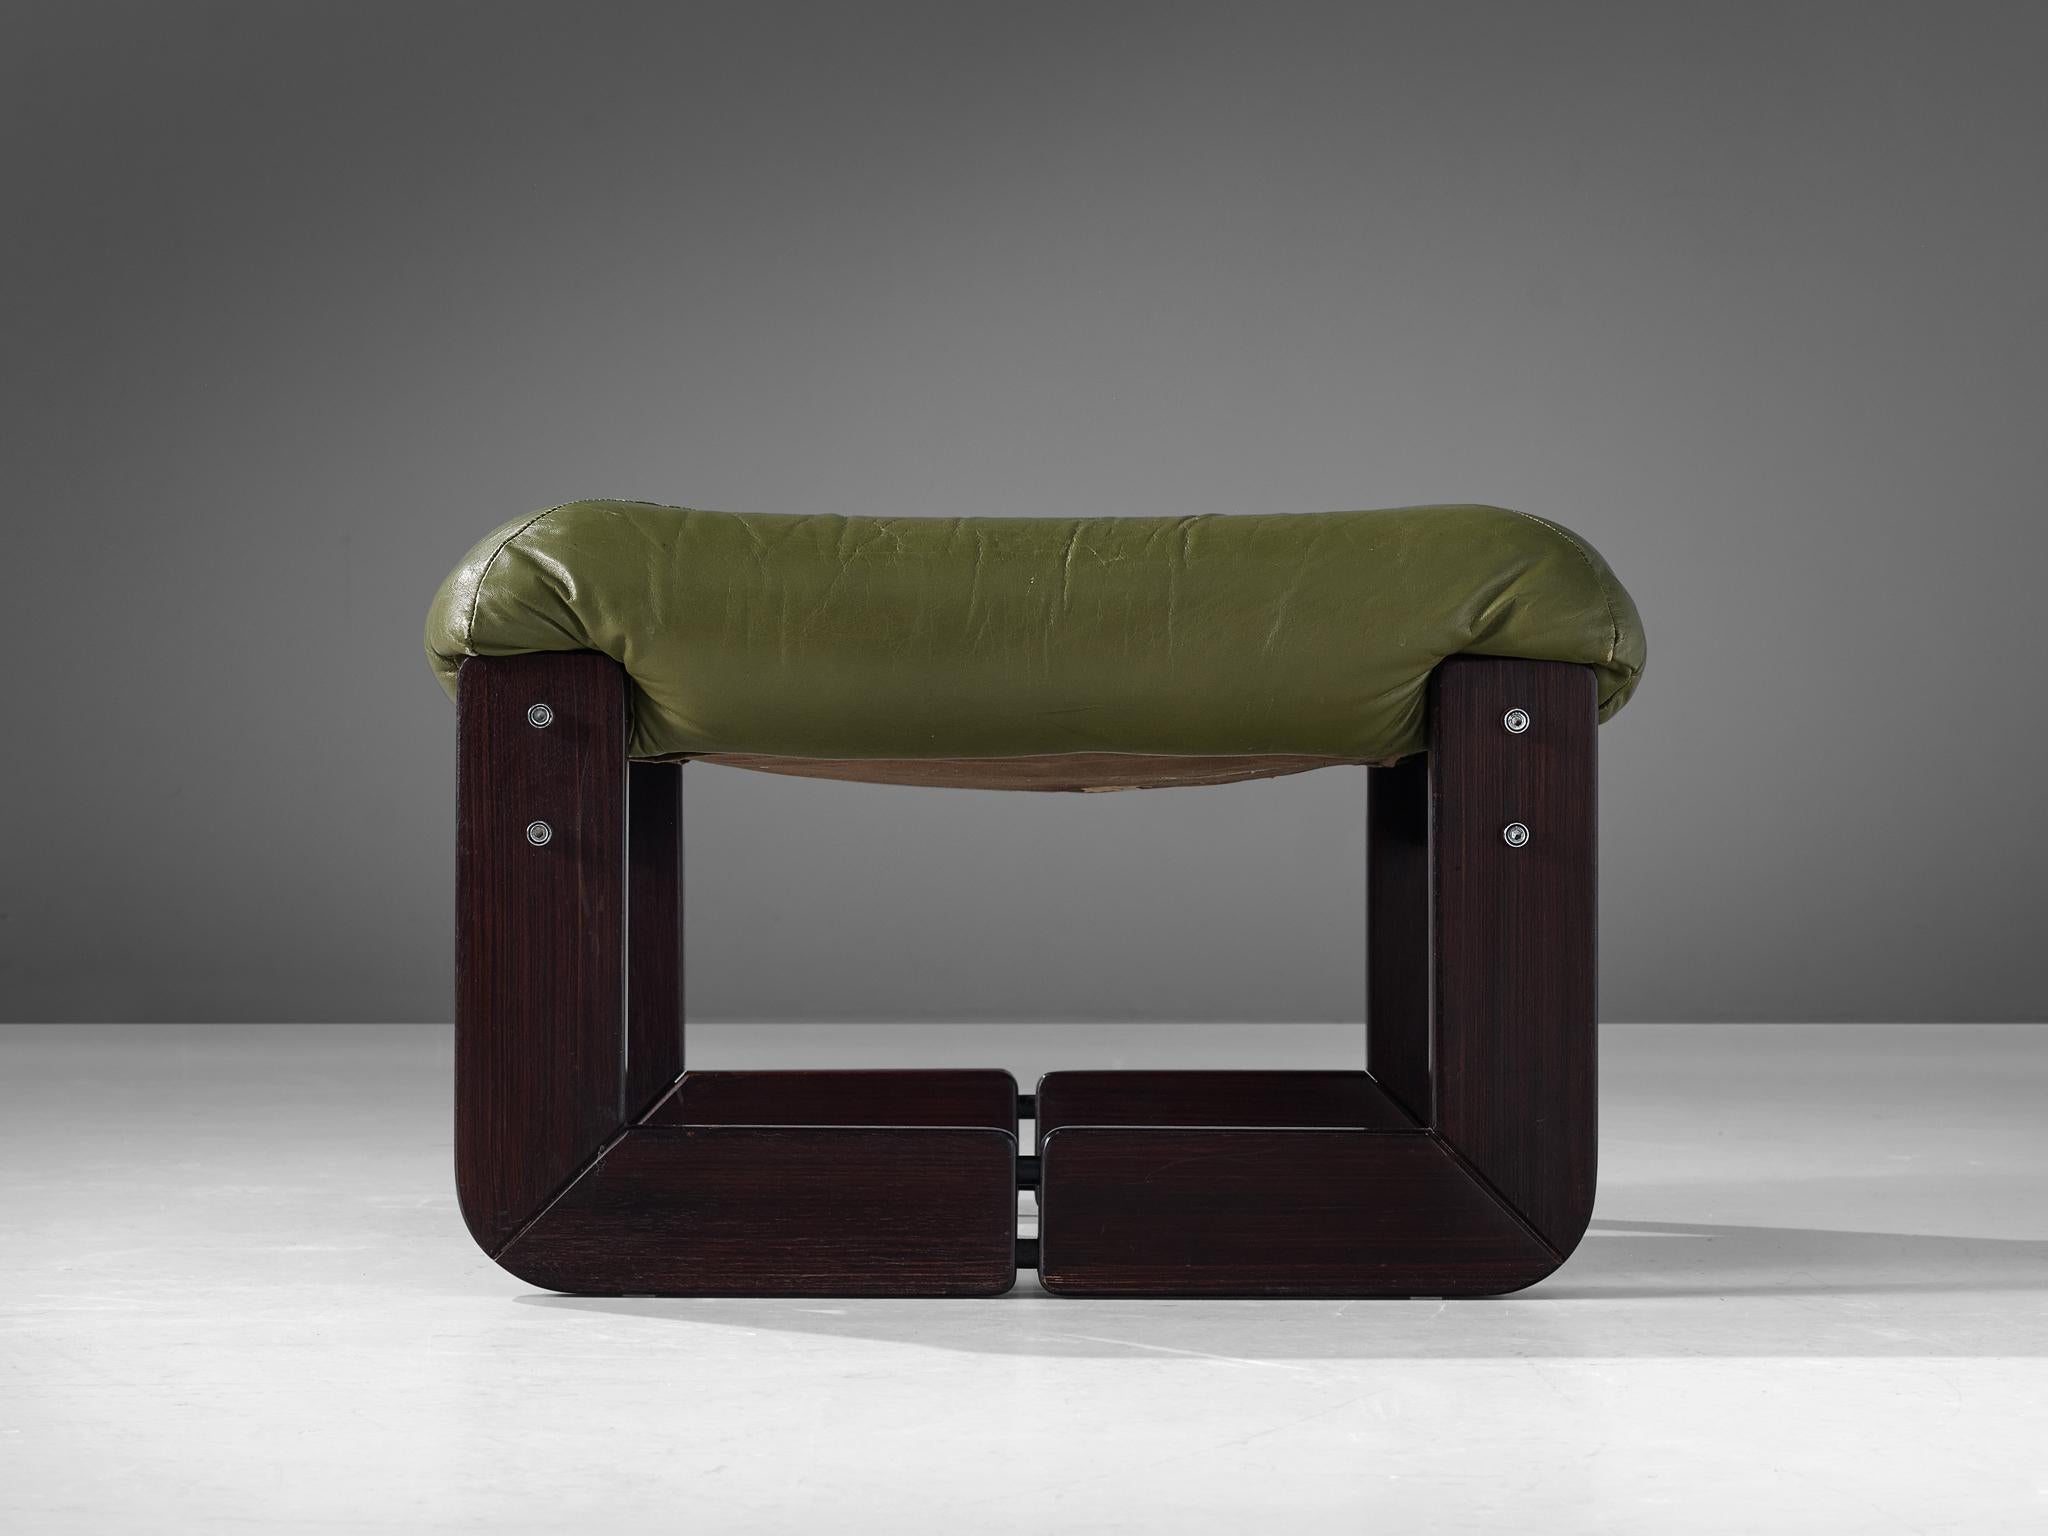 Percival Lafer, ottoman or stool, mahogany, leather, Brazil, 1970s

Bulky and voluptuous pouf made in the 1970s by Percival Lafer. The olive green leather of the seat is tufted, which contributes to the ottoman's sturdy appearance. The geometric